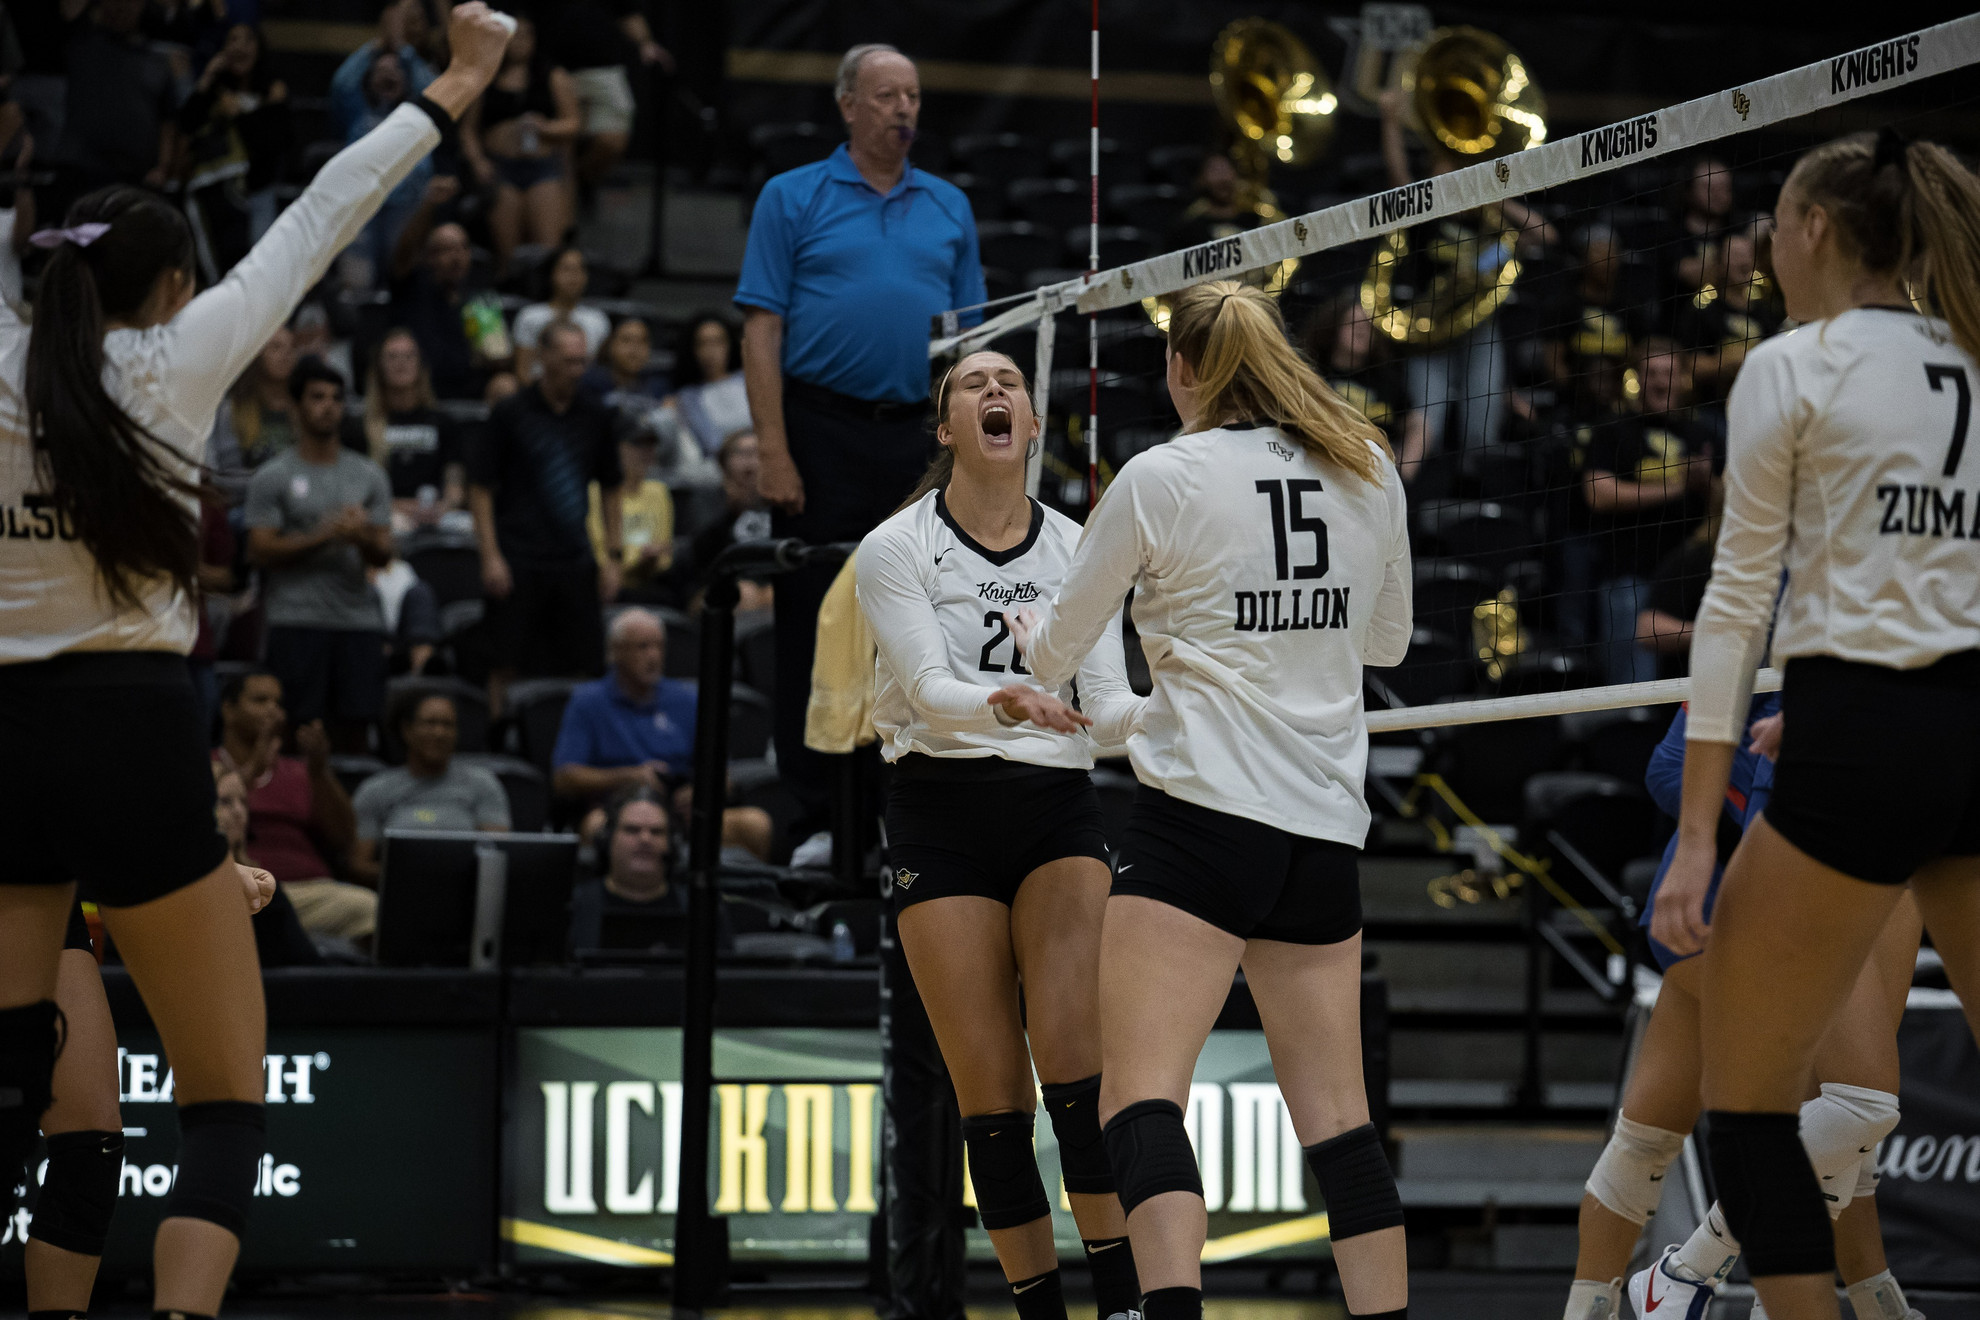 UCF Volleyball Enters Top 25 in Latest AVCA Poll, Melville breaks